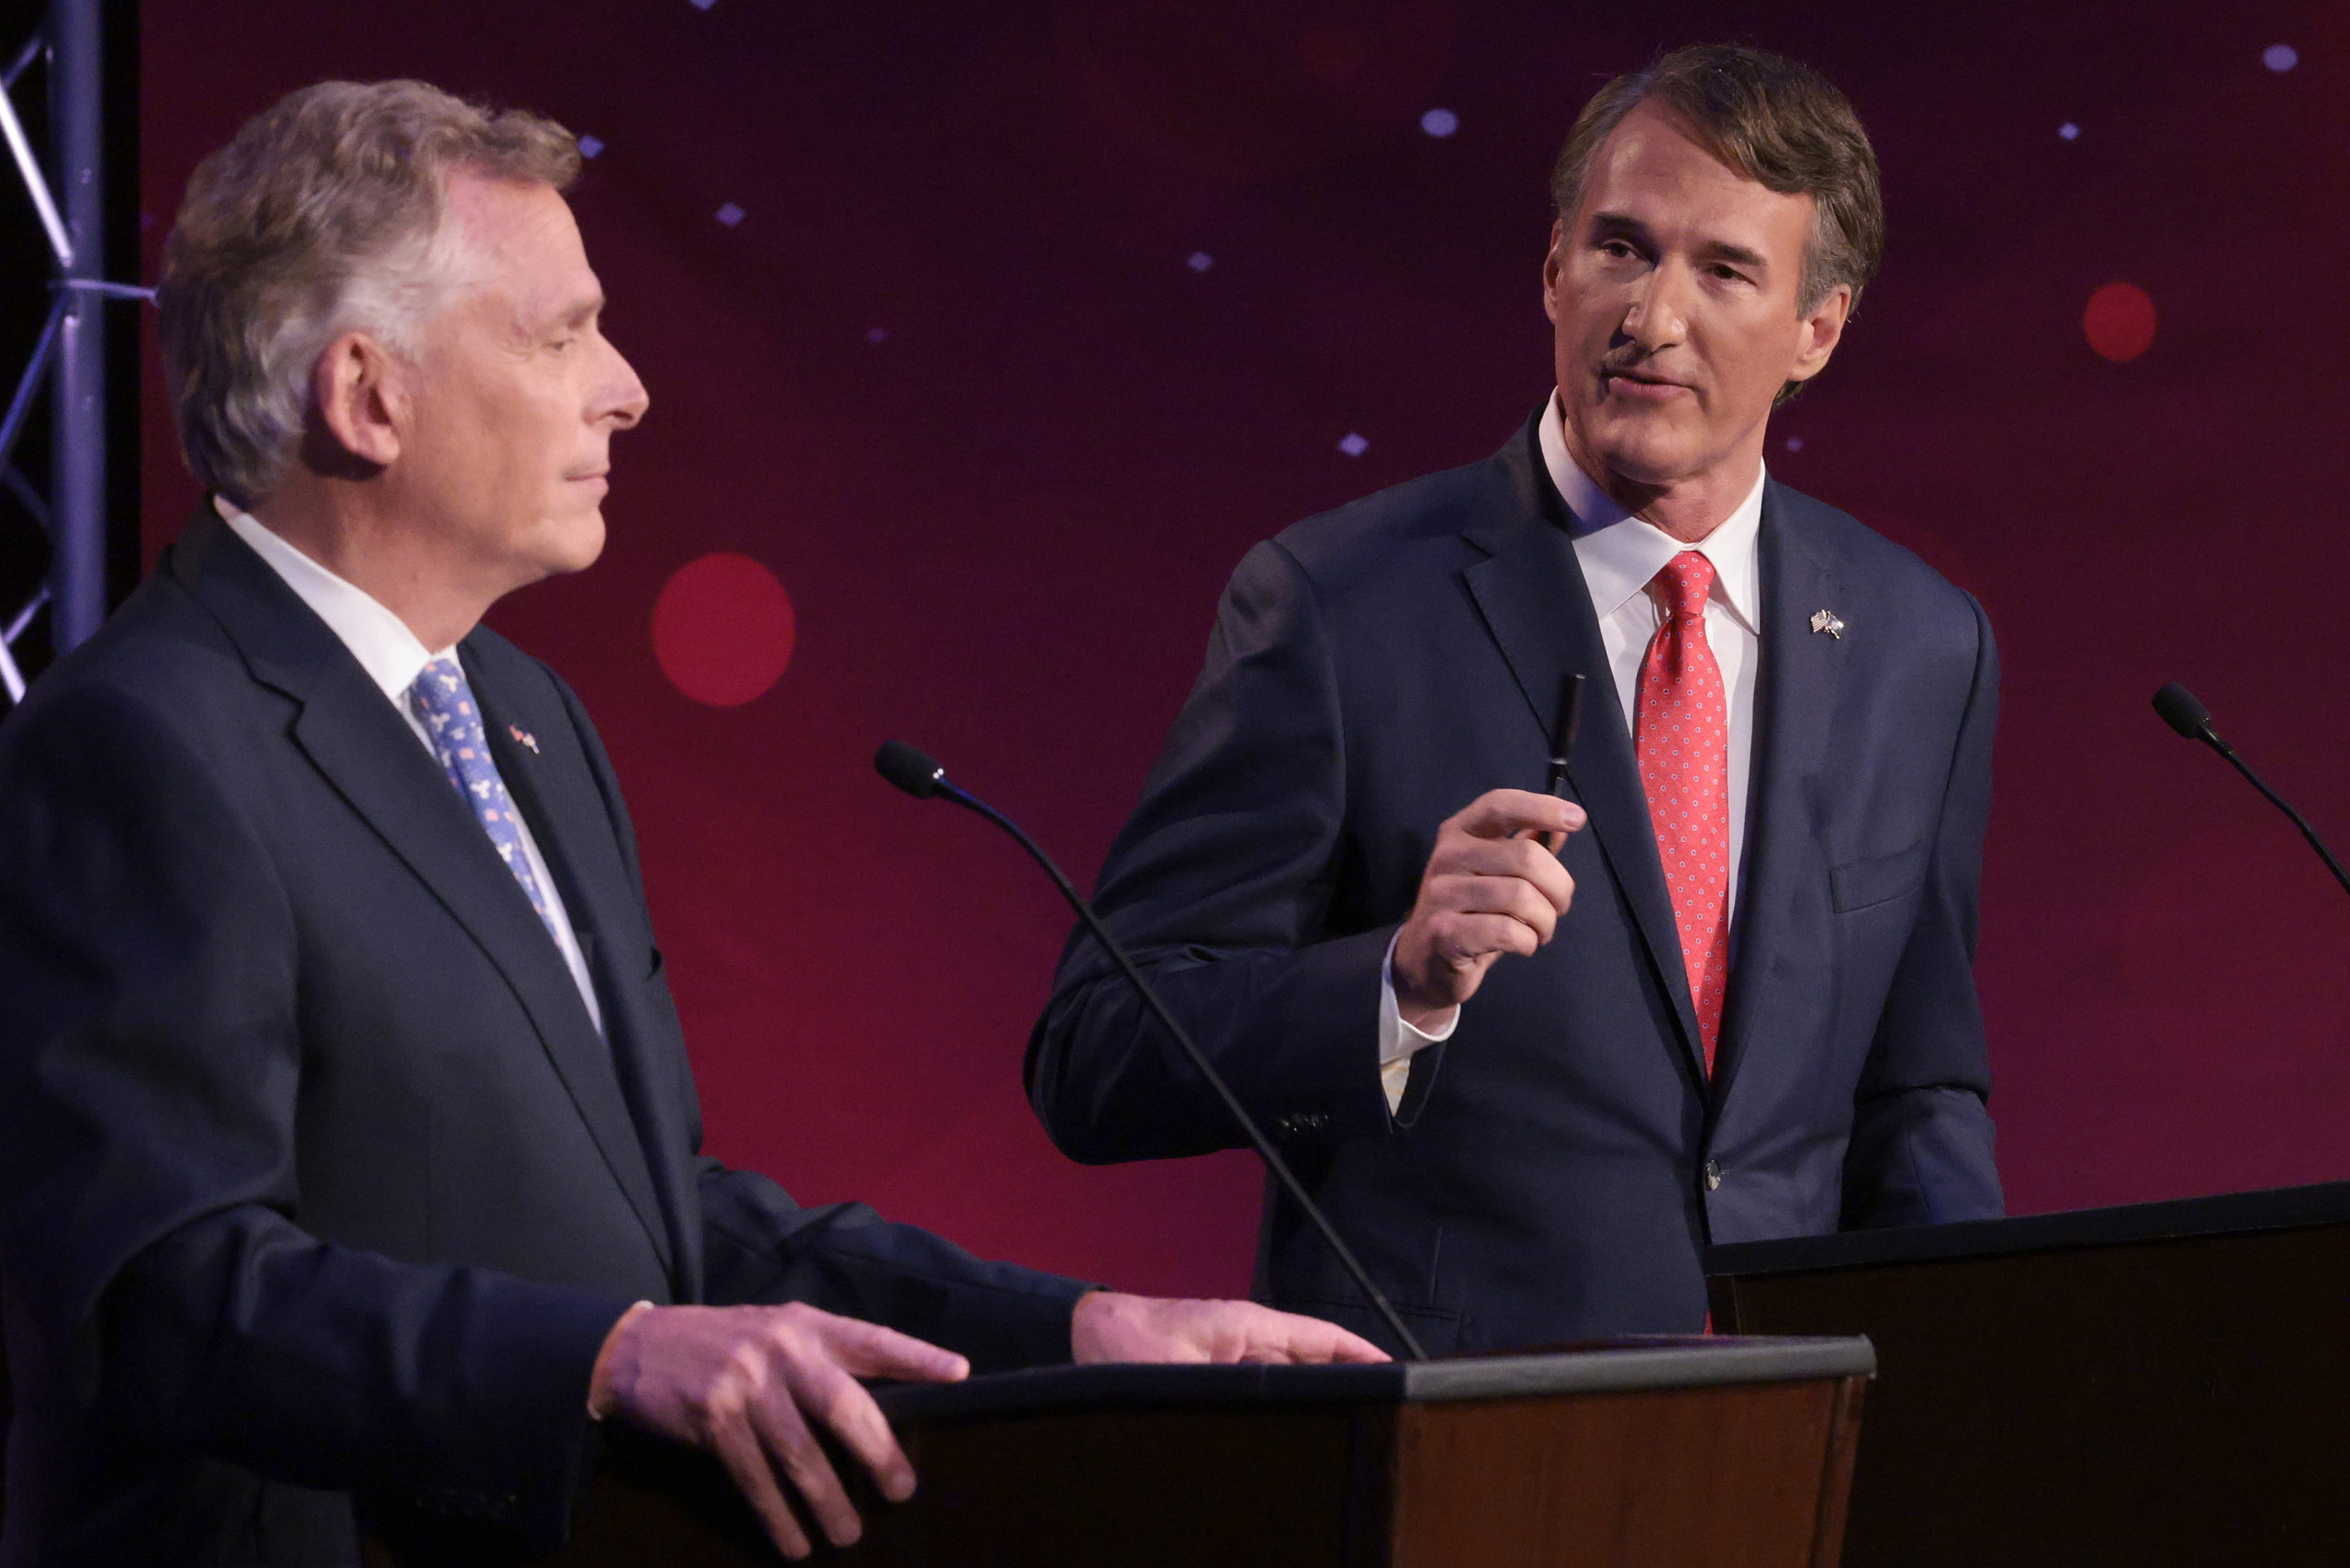 Former Virginia Gov. Terry McAuliffe and Republican gubernatorial candidate Glenn Youngkin debate in Alexandria, Virginia last month. The race has gotten steadily closer in its final weeks. (Win McNamee/Getty Images)